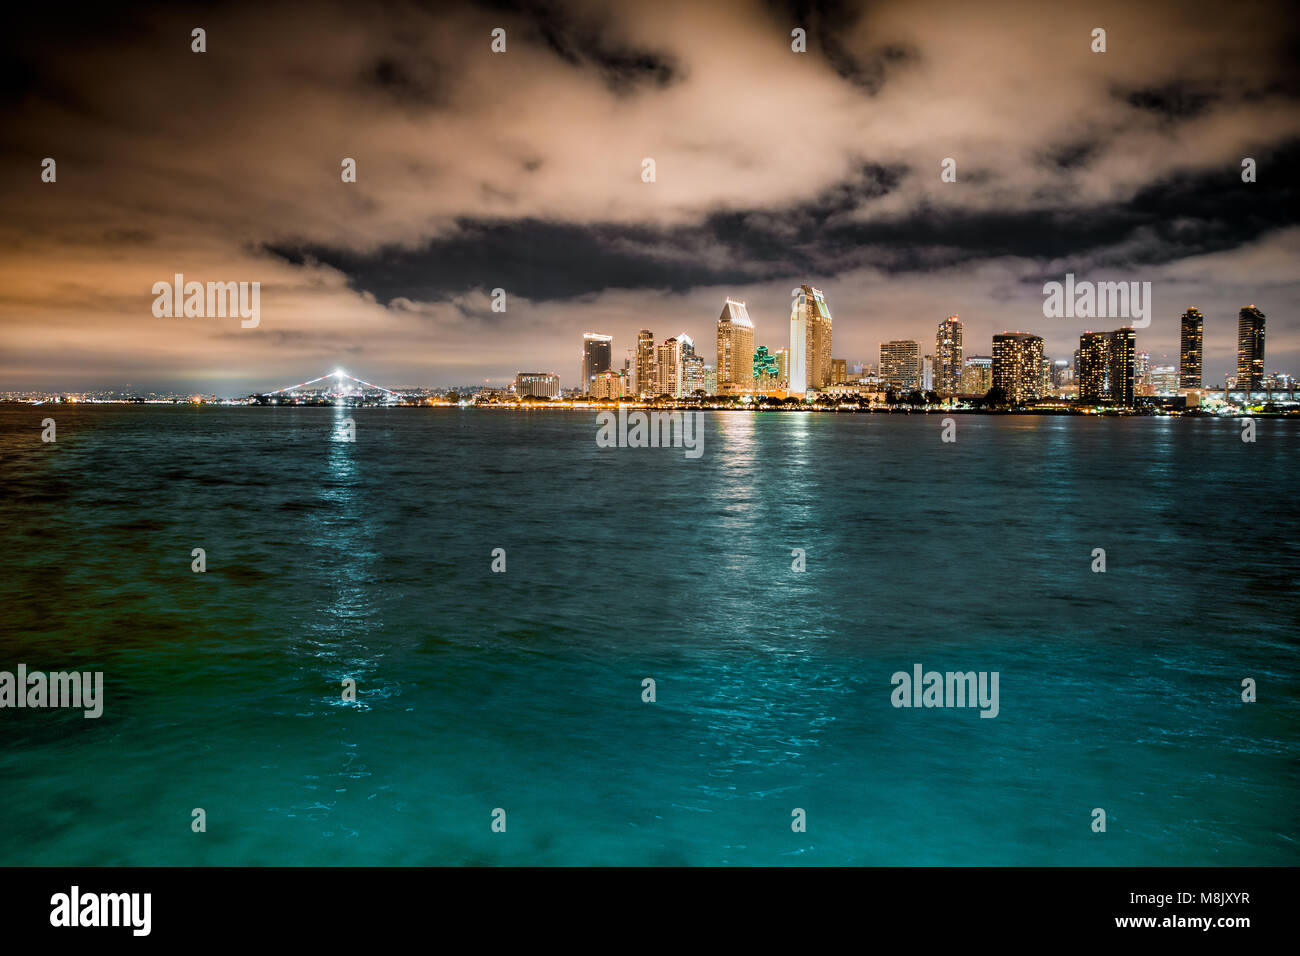 San Diego skyline and bay seen at night with clouds, dark sky and light buildings Stock Photo